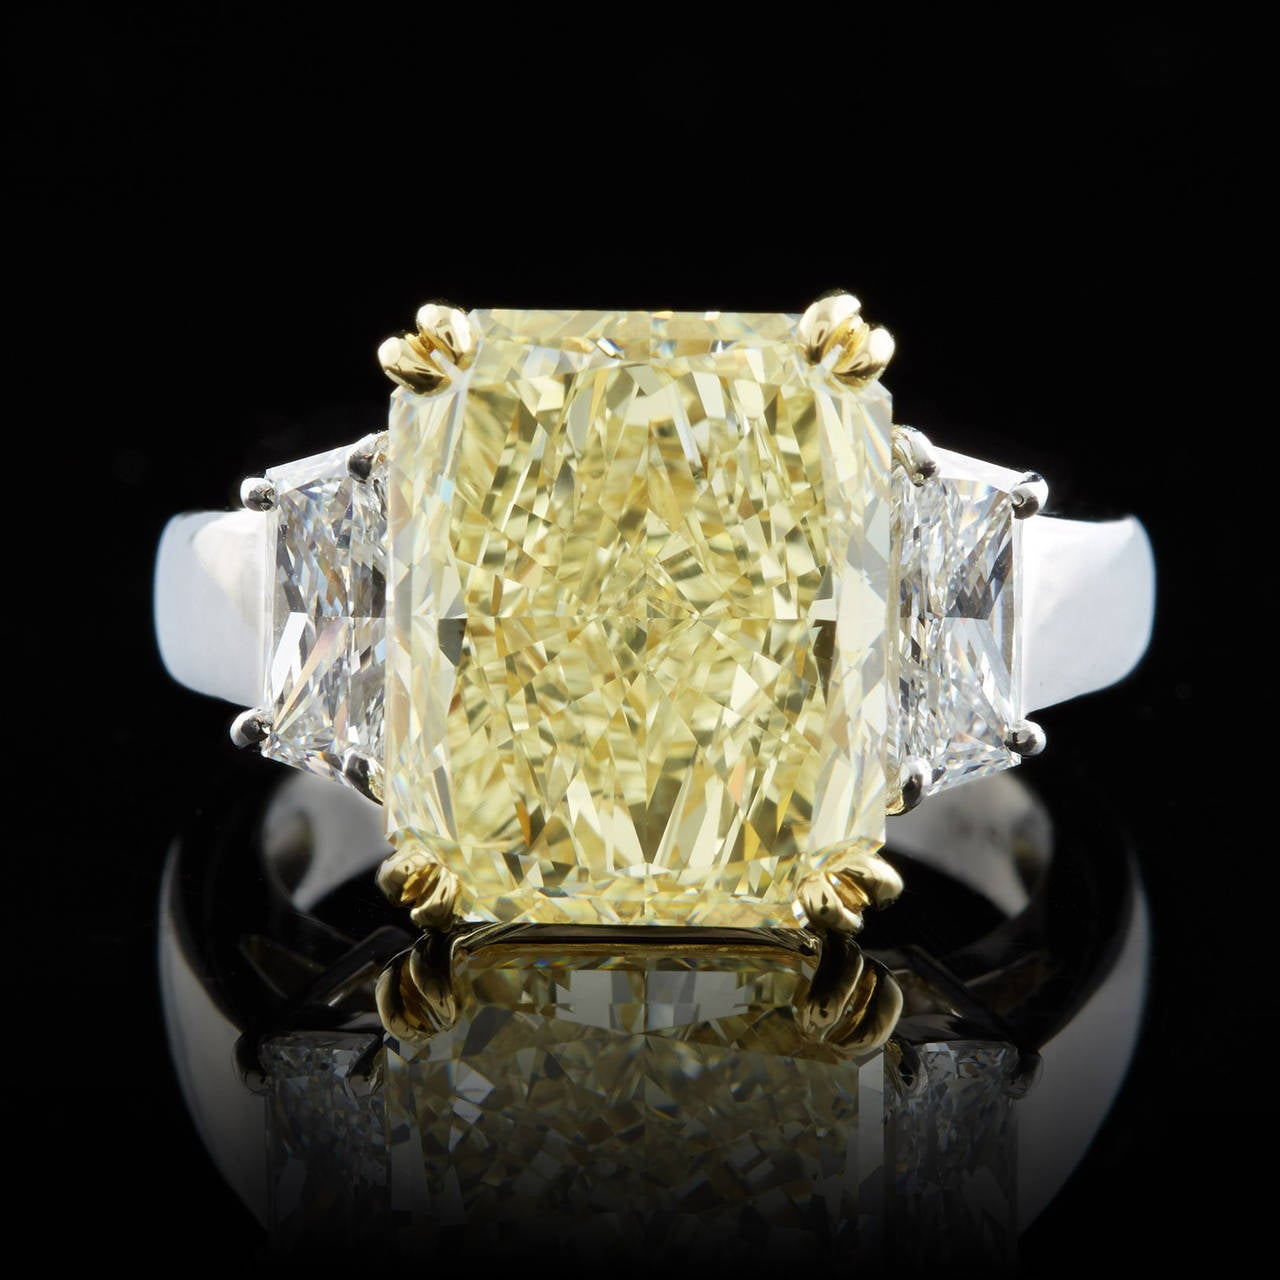 Gorgeous Platinum Three-Stone Diamond Ring Features a Center 8.00-ct Fancy Light Yellow Radiant Cut Diamond with VS2 Clarity, Set in an 18Kt Yellow Gold 4-Prong Setting. Flanked on the sides are 2 trapezoid cut diamonds totaling 1.72 carats with F